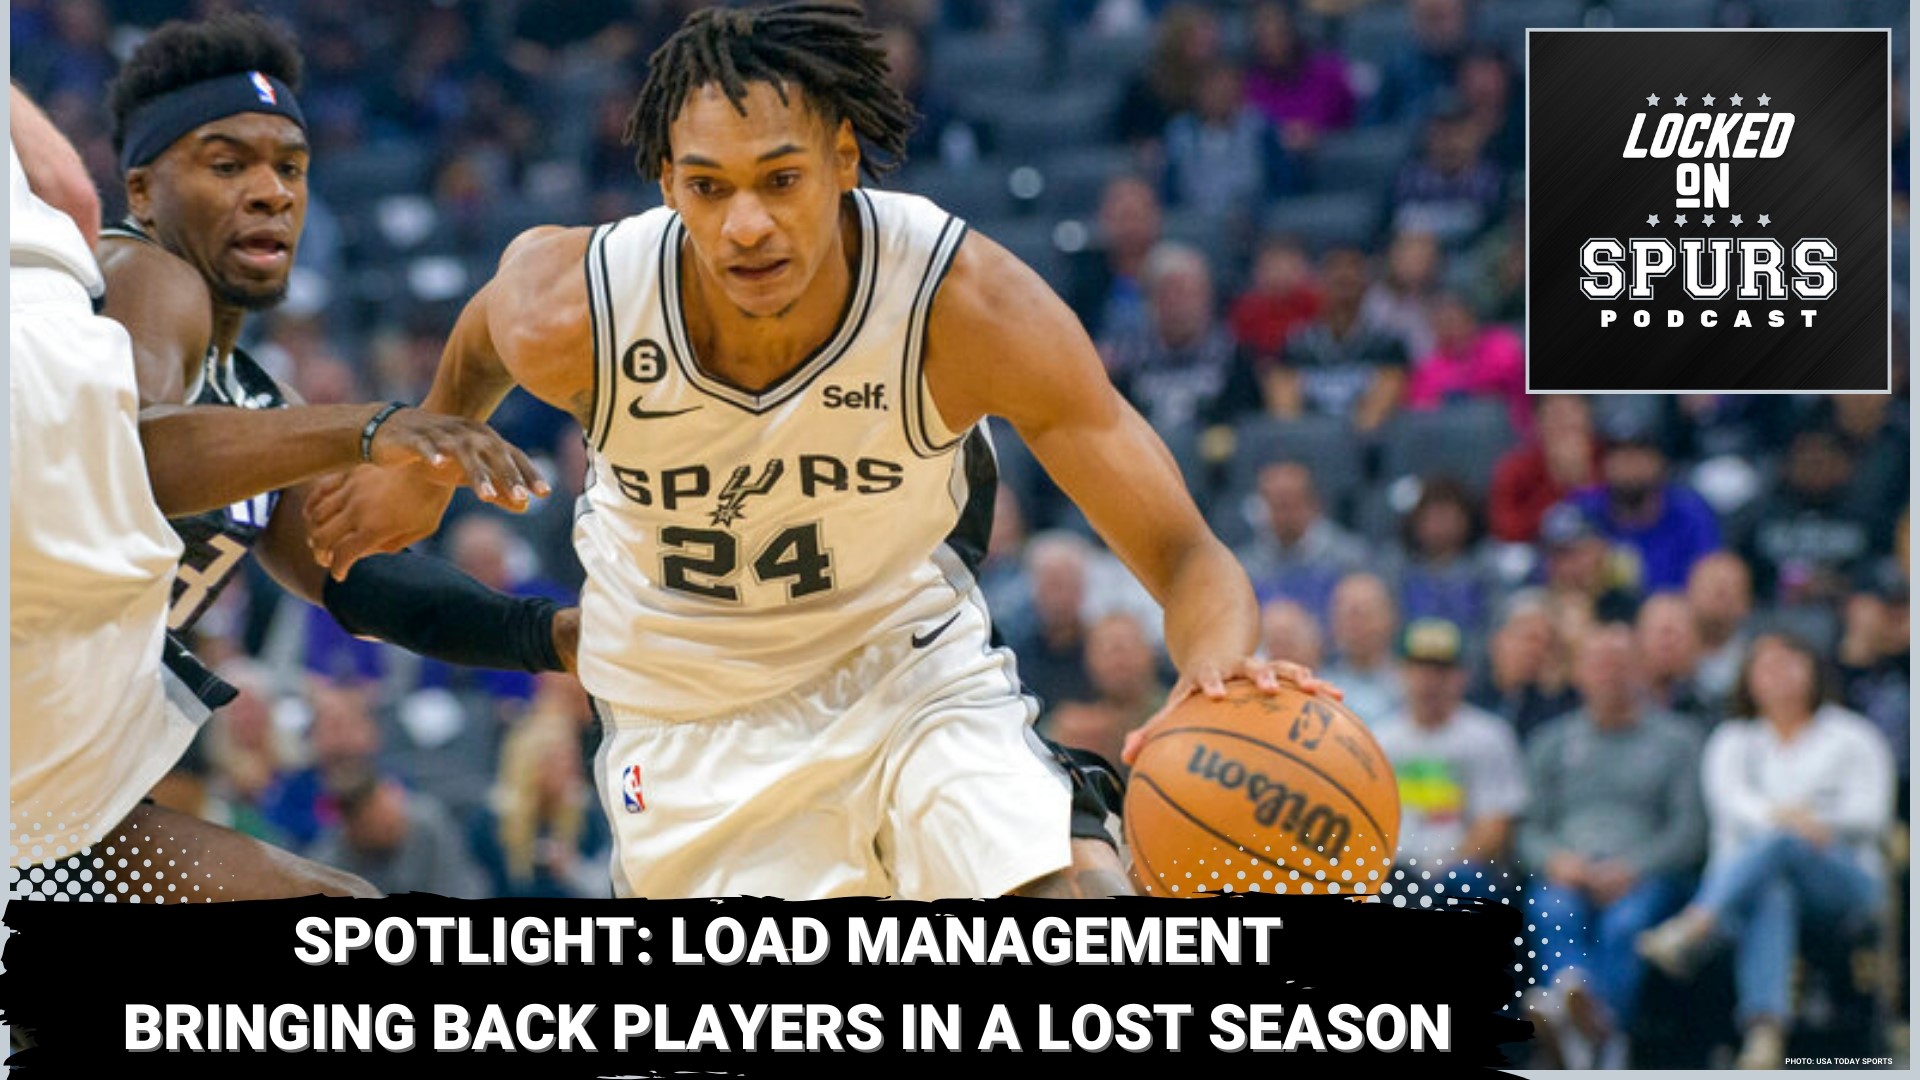 Dr. McCorkle is back for his weekly visit to discuss the Spurs, injuries, and sneakers.